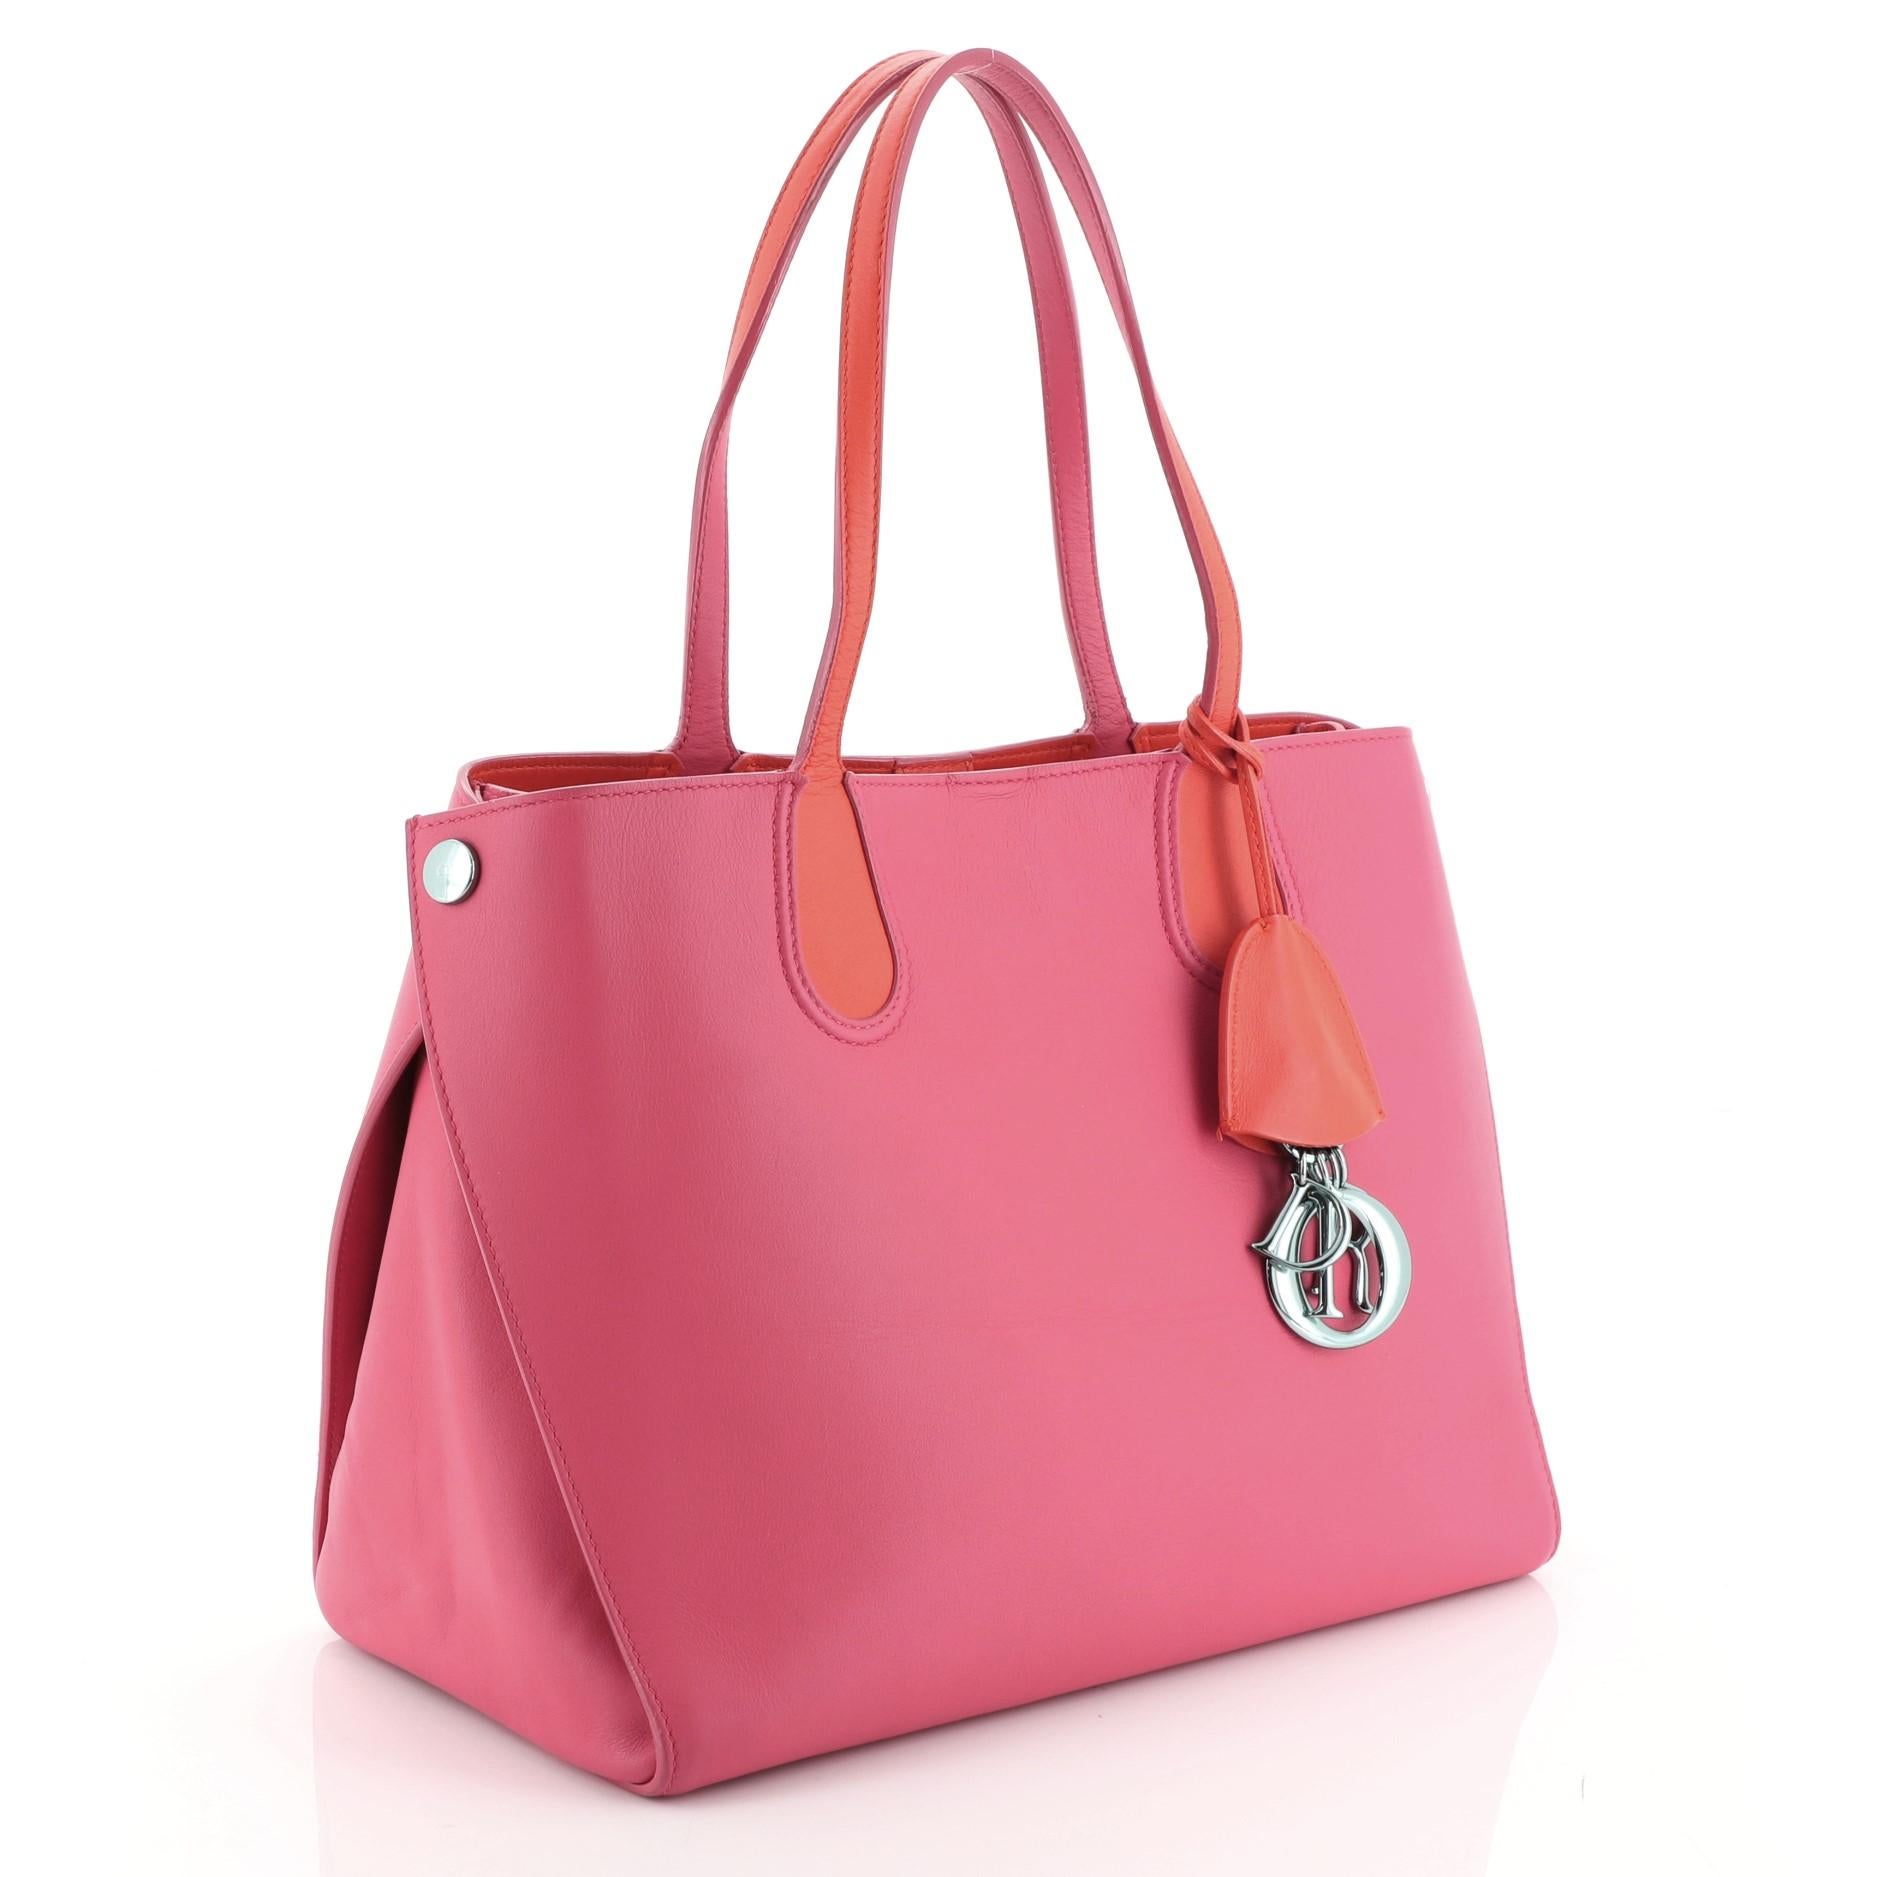 This Christian Dior Addict Shopping Tote Leather Small, crafted in pink leather, features dual slim leather handles, side snap buttons, Dior charms and gunmetal-tone hardware. Its magnetic snap closure opens to an orange leather interior .